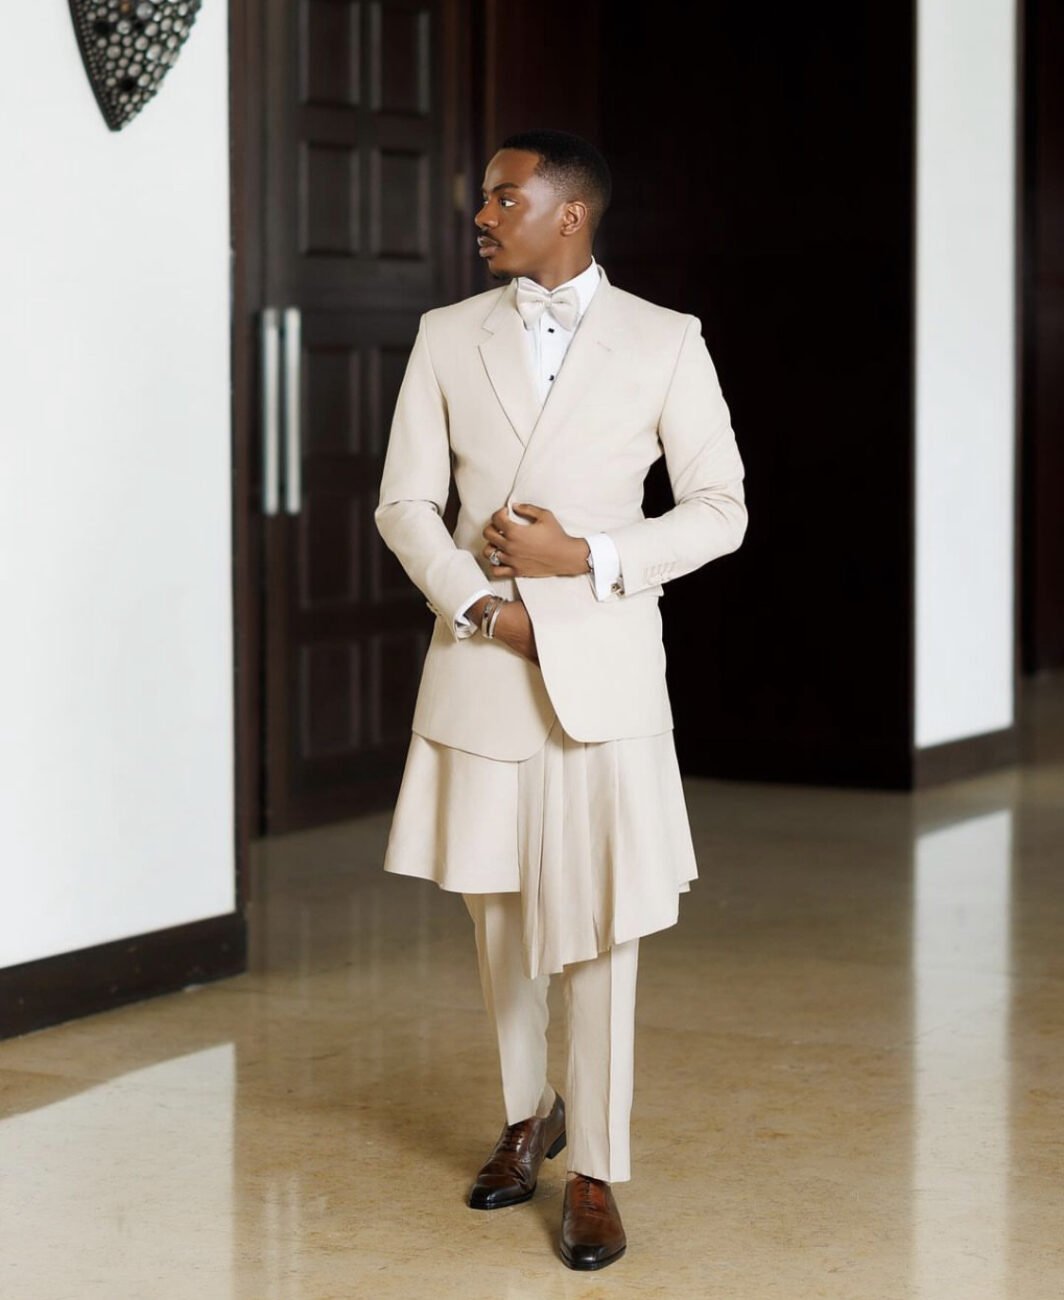 Enioluwa Adeoluwa in a milk colored suit with a skirt paired with the trousers.